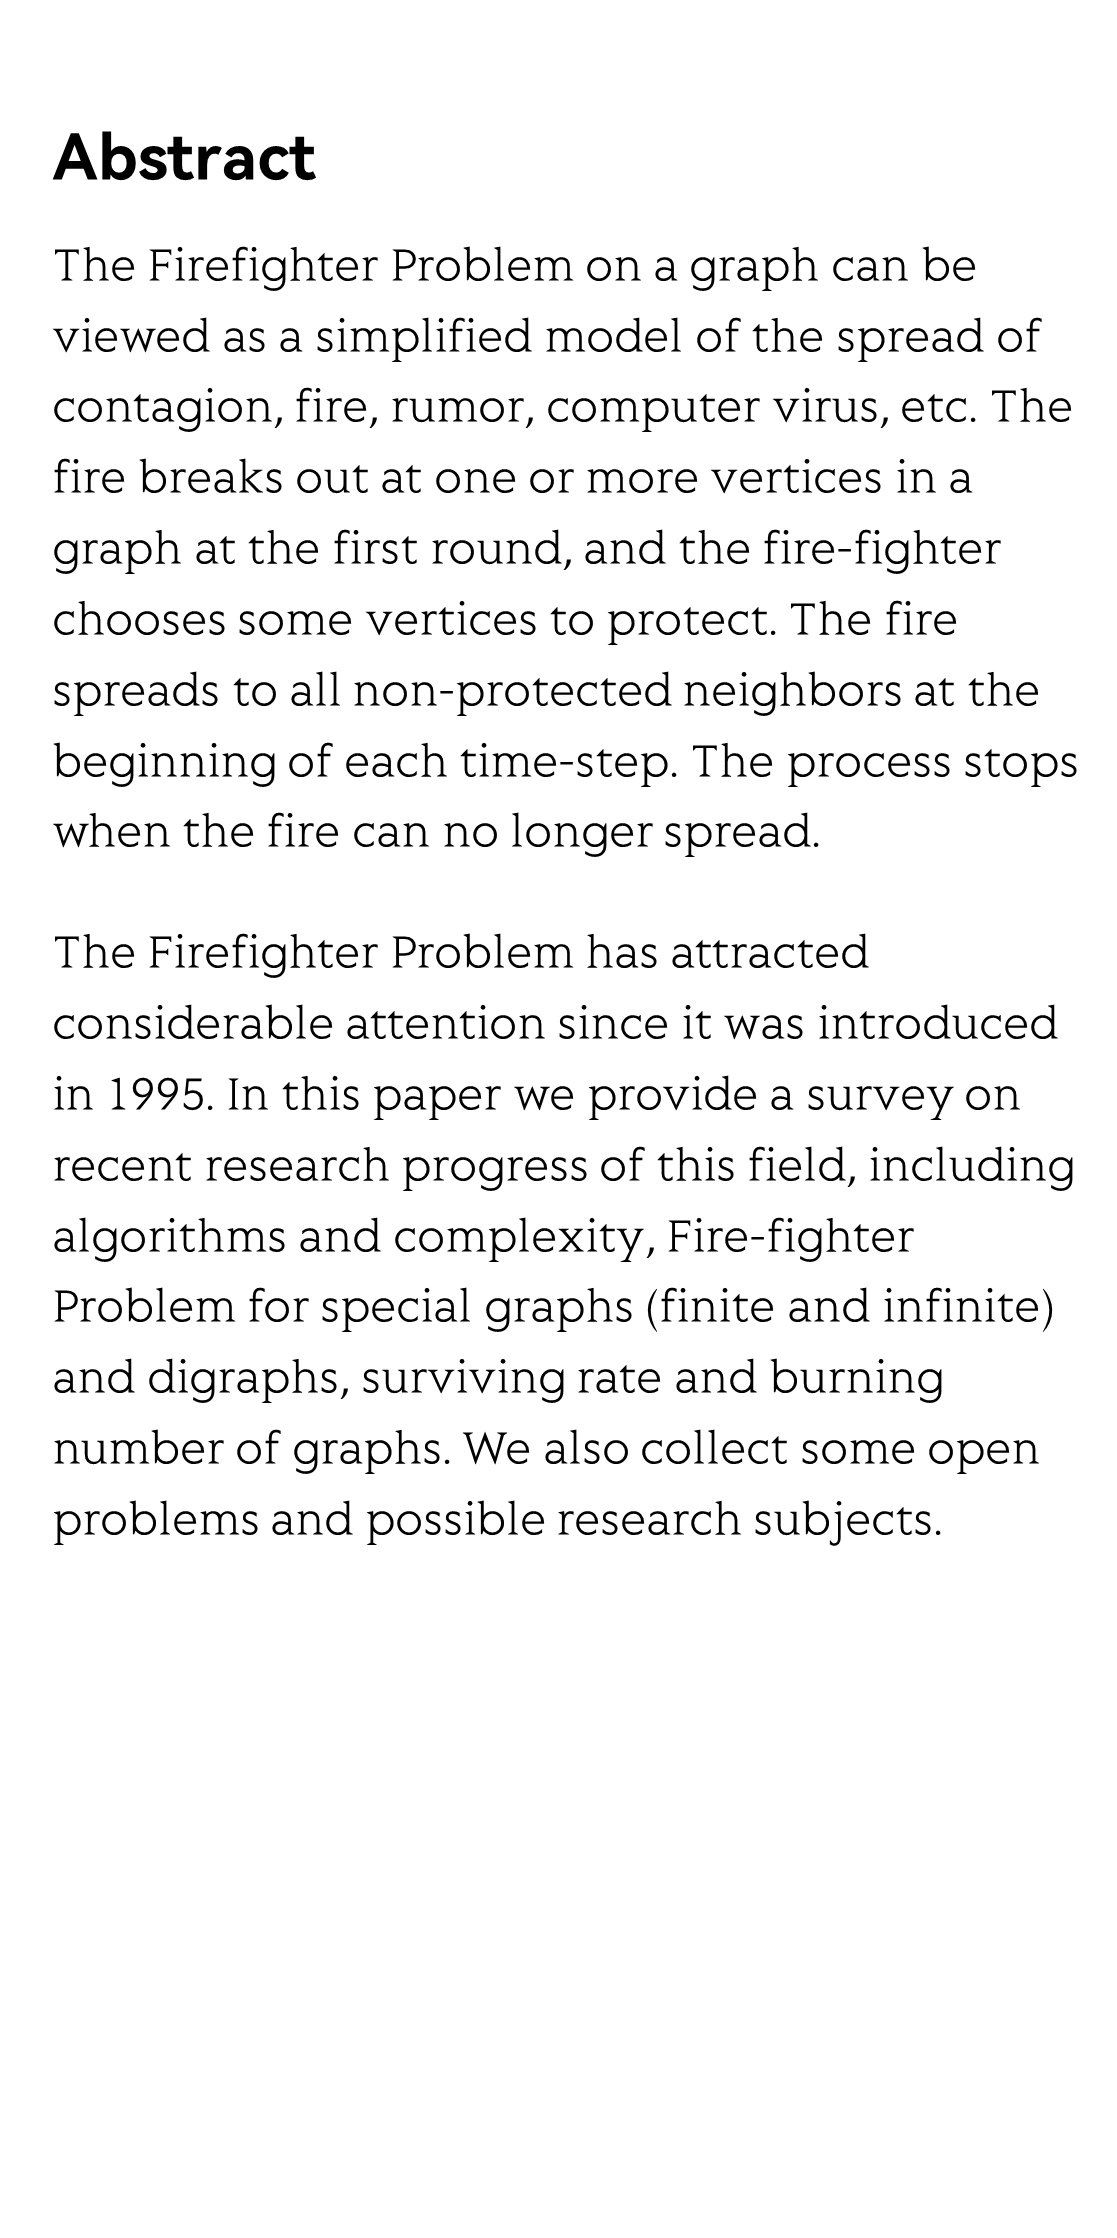 Surviving rate of graphs and Firefighter Problem_2